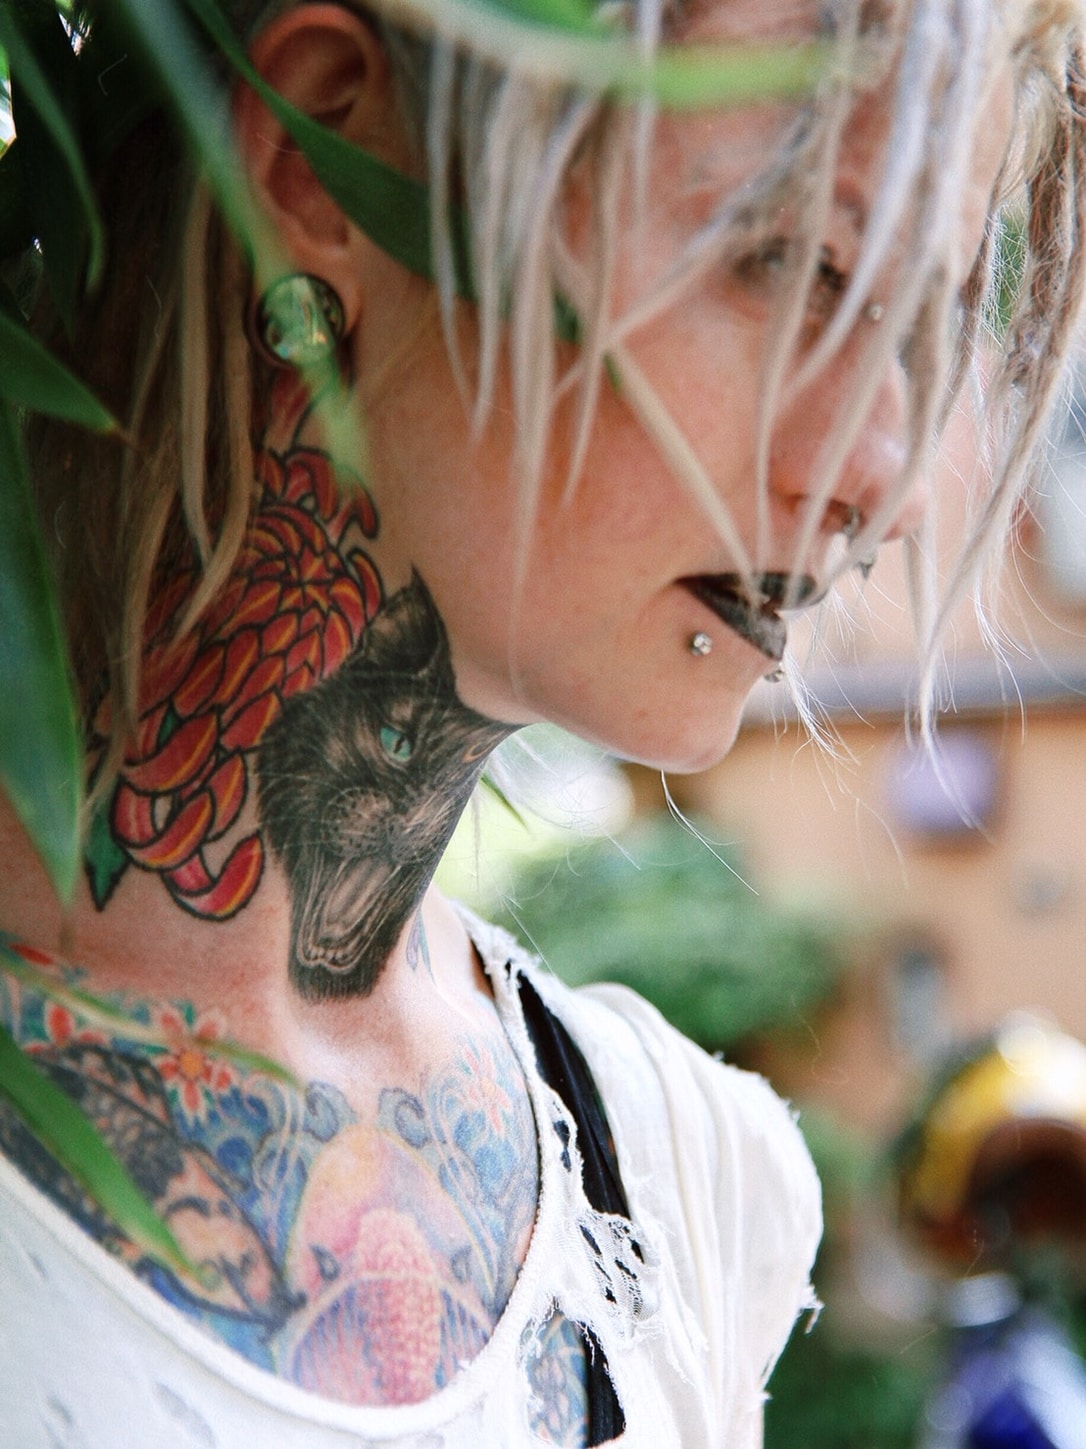 Photo Story New Project Showcases Tattooed Women In Japan To Shift 